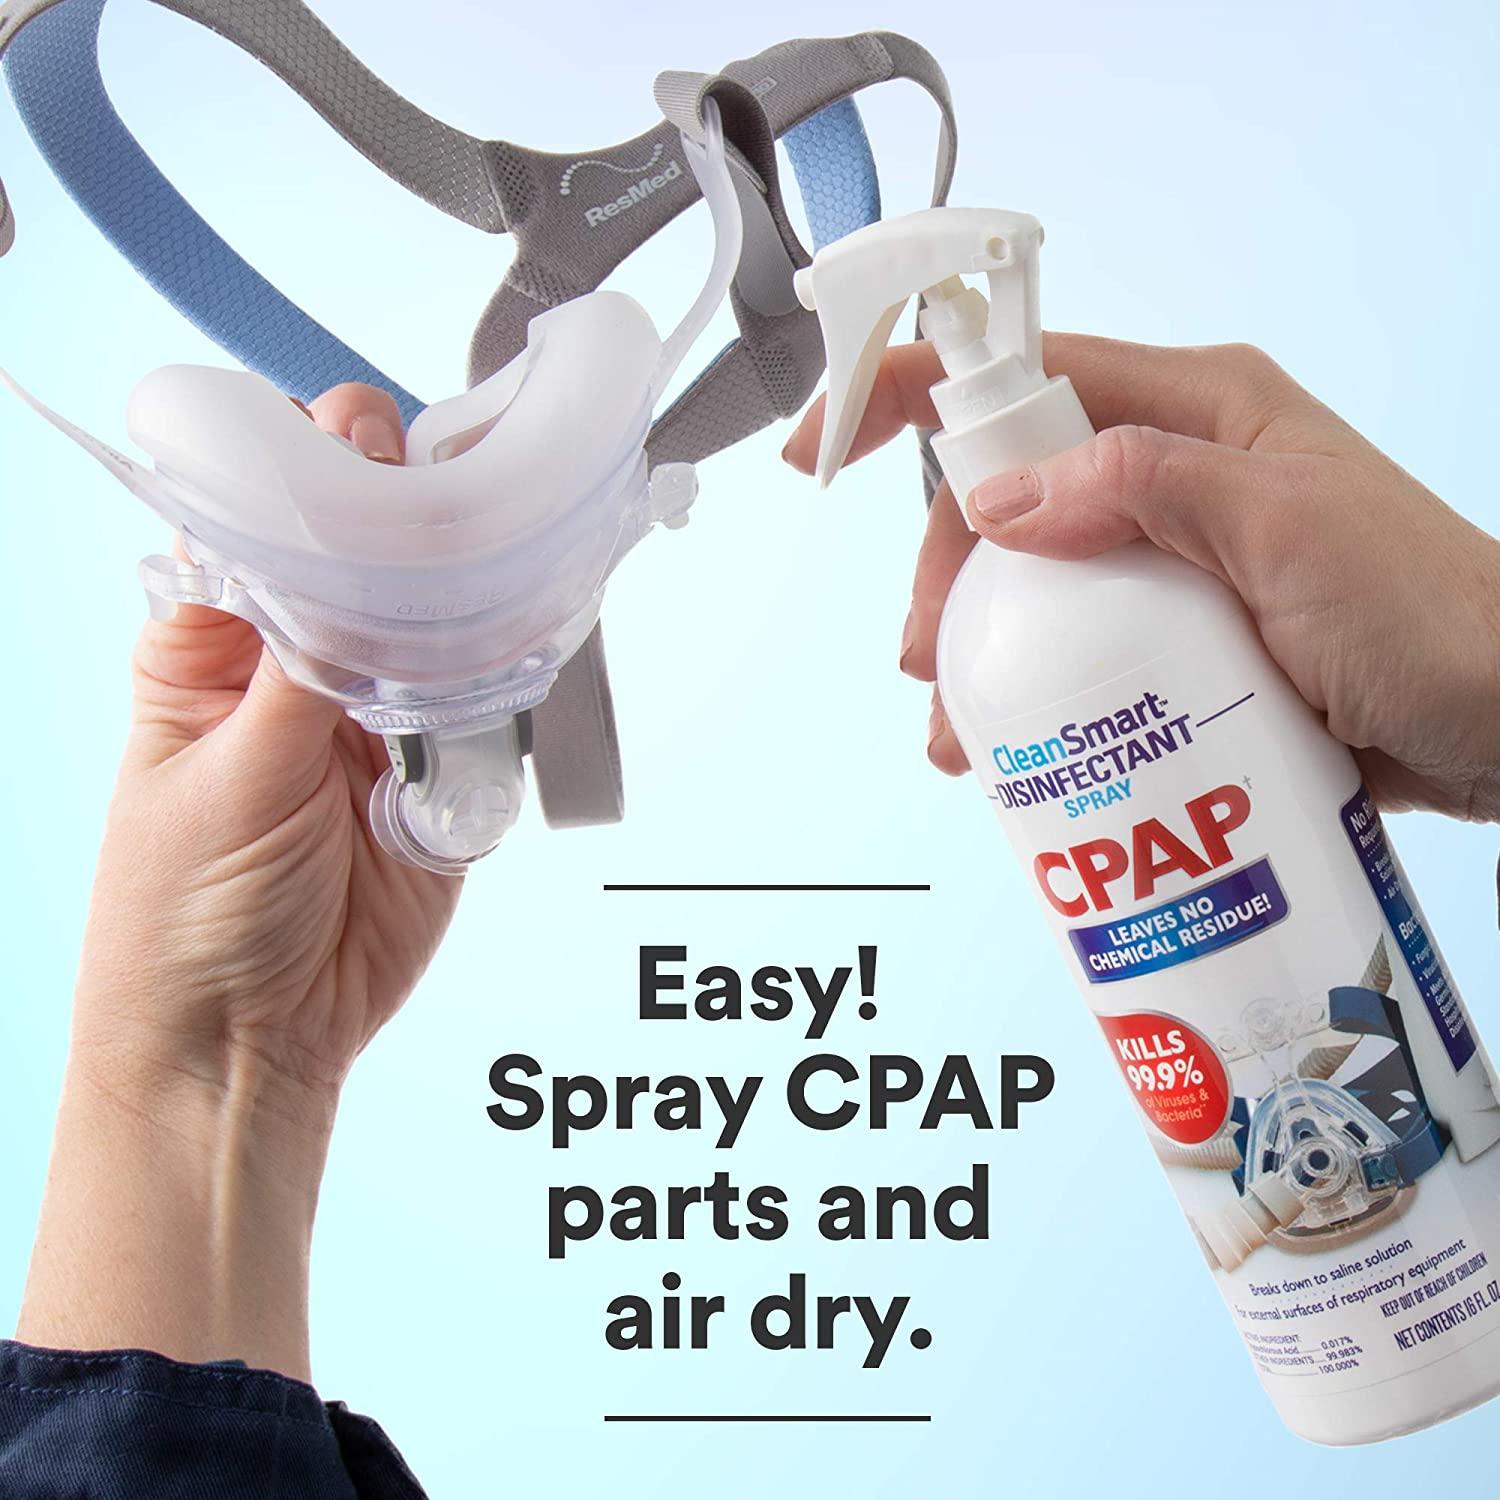 SoSafe Spray Away General Purpose Cleaner and Mold Remover, 25 oz trigger  sprayer